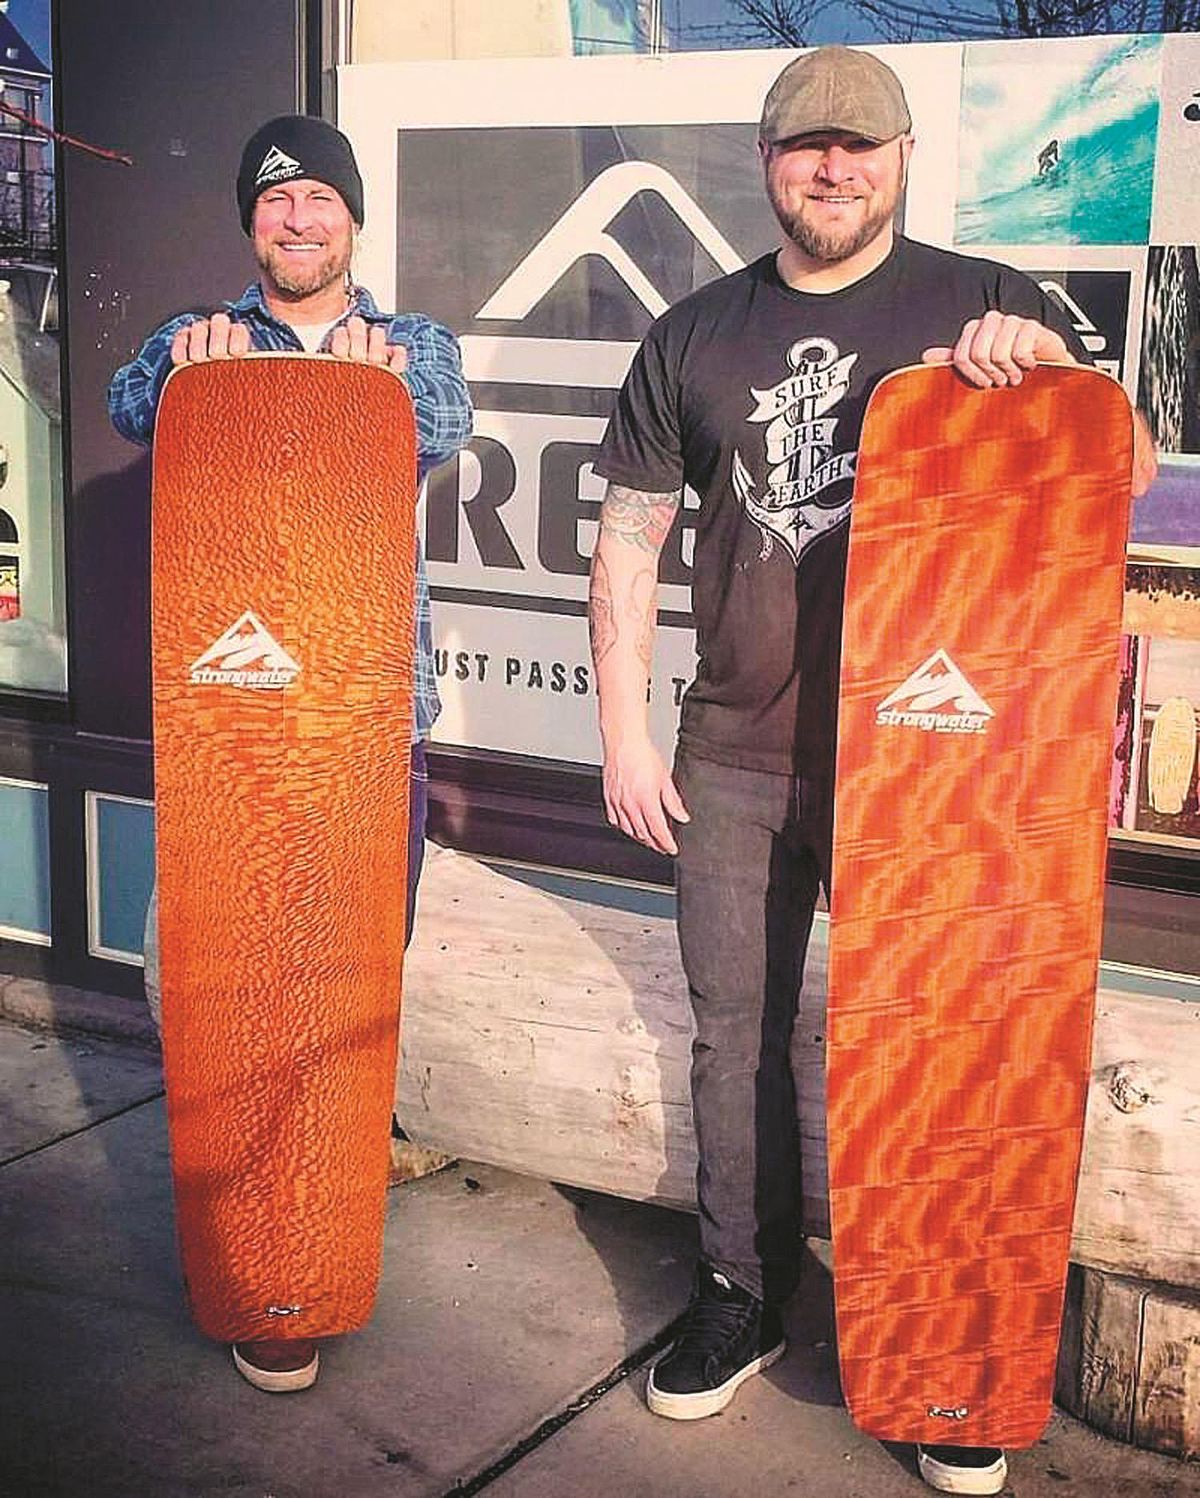 Luke Rieker and K.B. Brown of Strongwater Mnt. Surf Co. at Missoula, Mont., display powder boards, binding-free boards designed to be used on backcountry slopes. (COURTESY PHOTO / Courtesy of Luke Rieker)